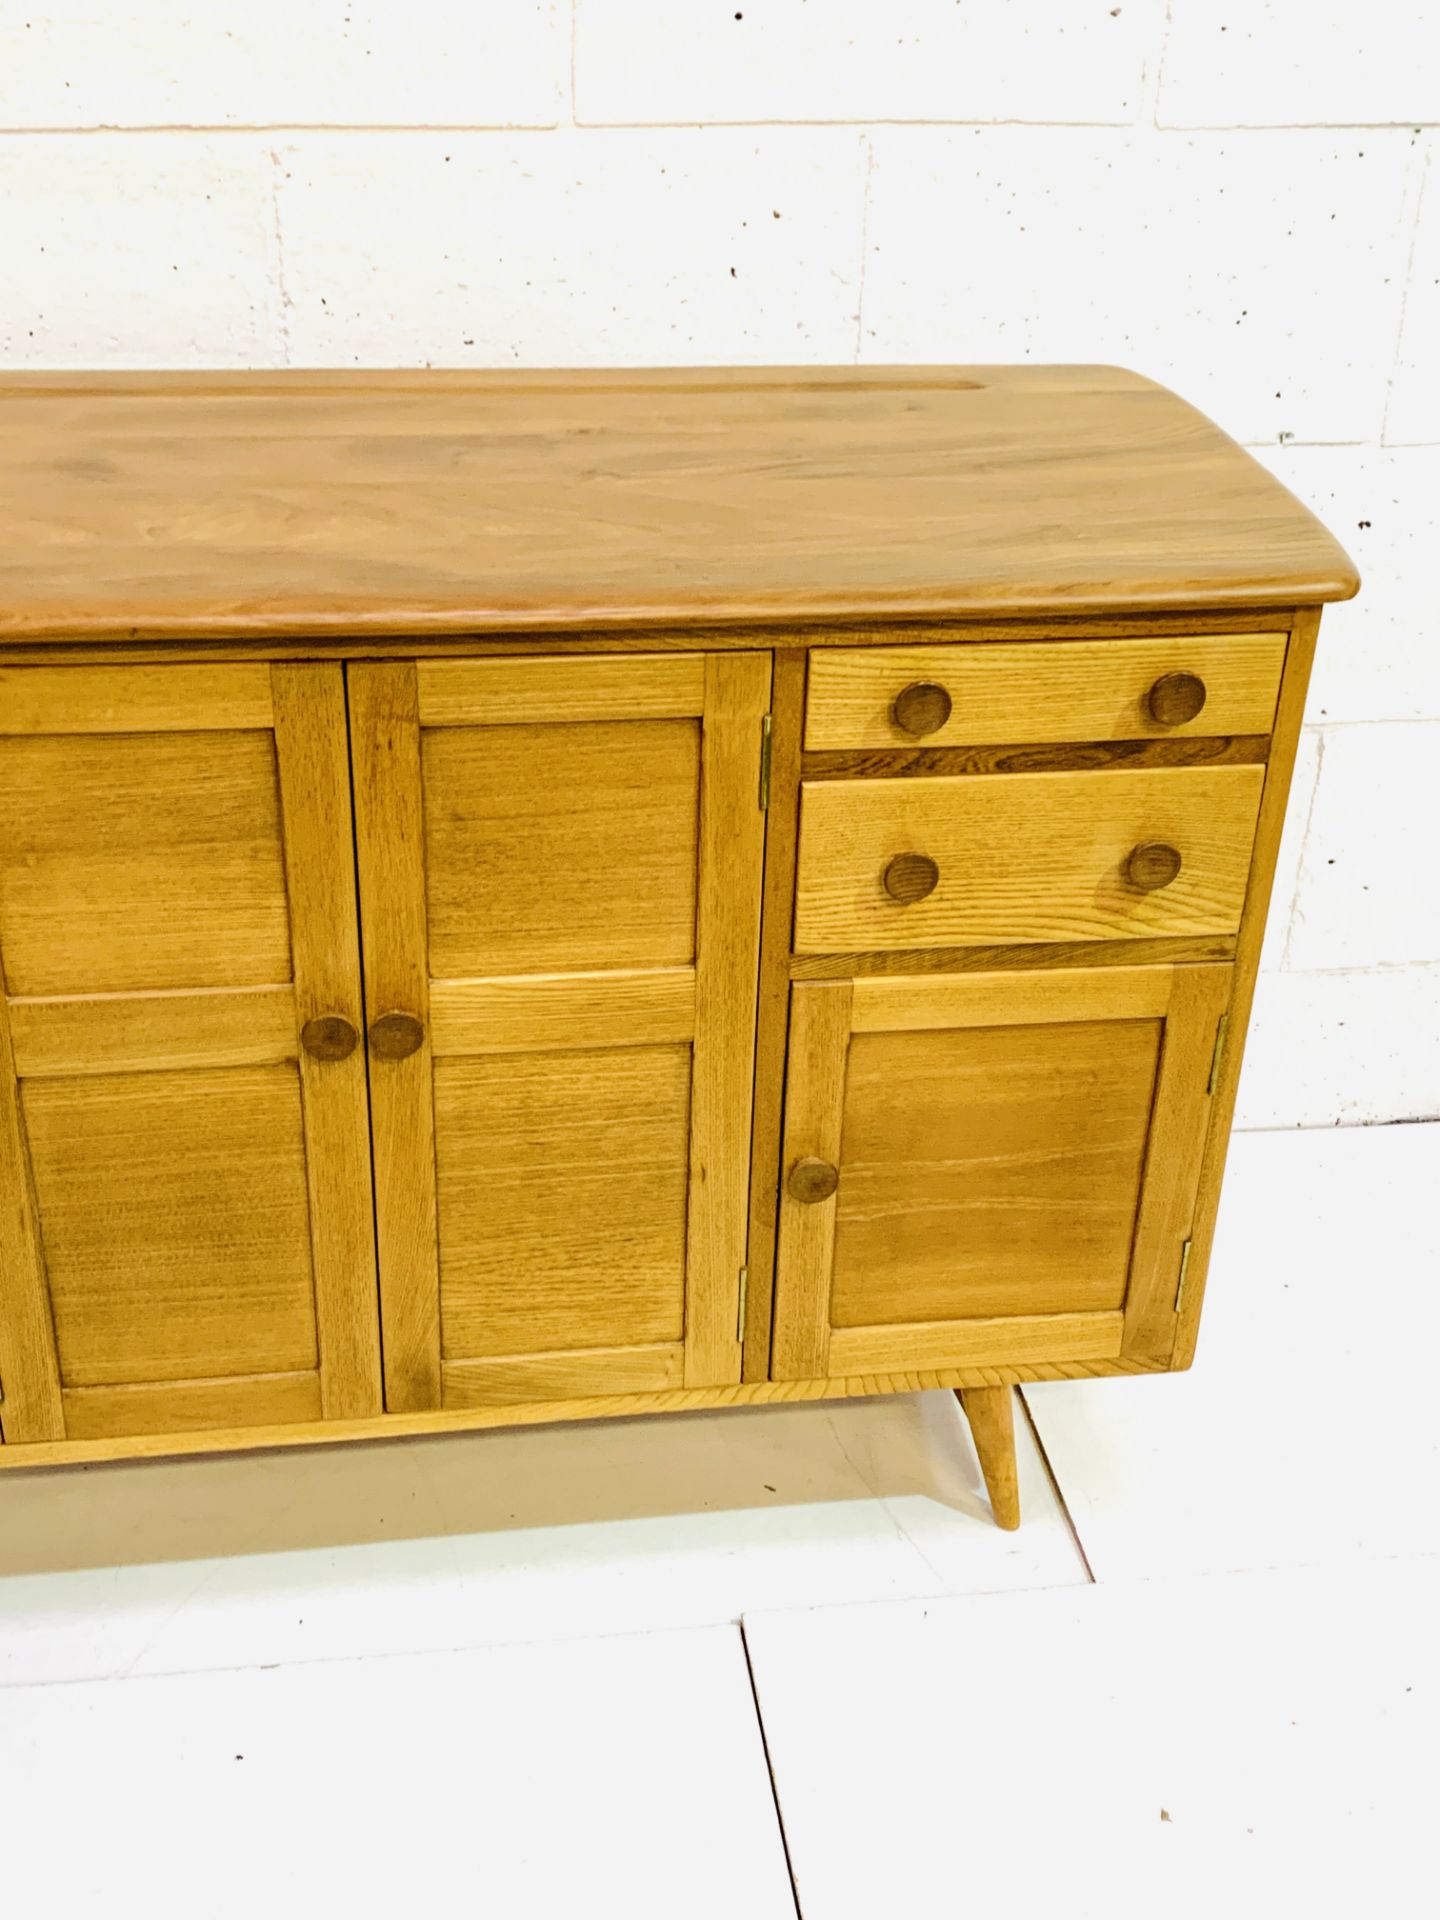 Ercol style sideboard - Image 3 of 6